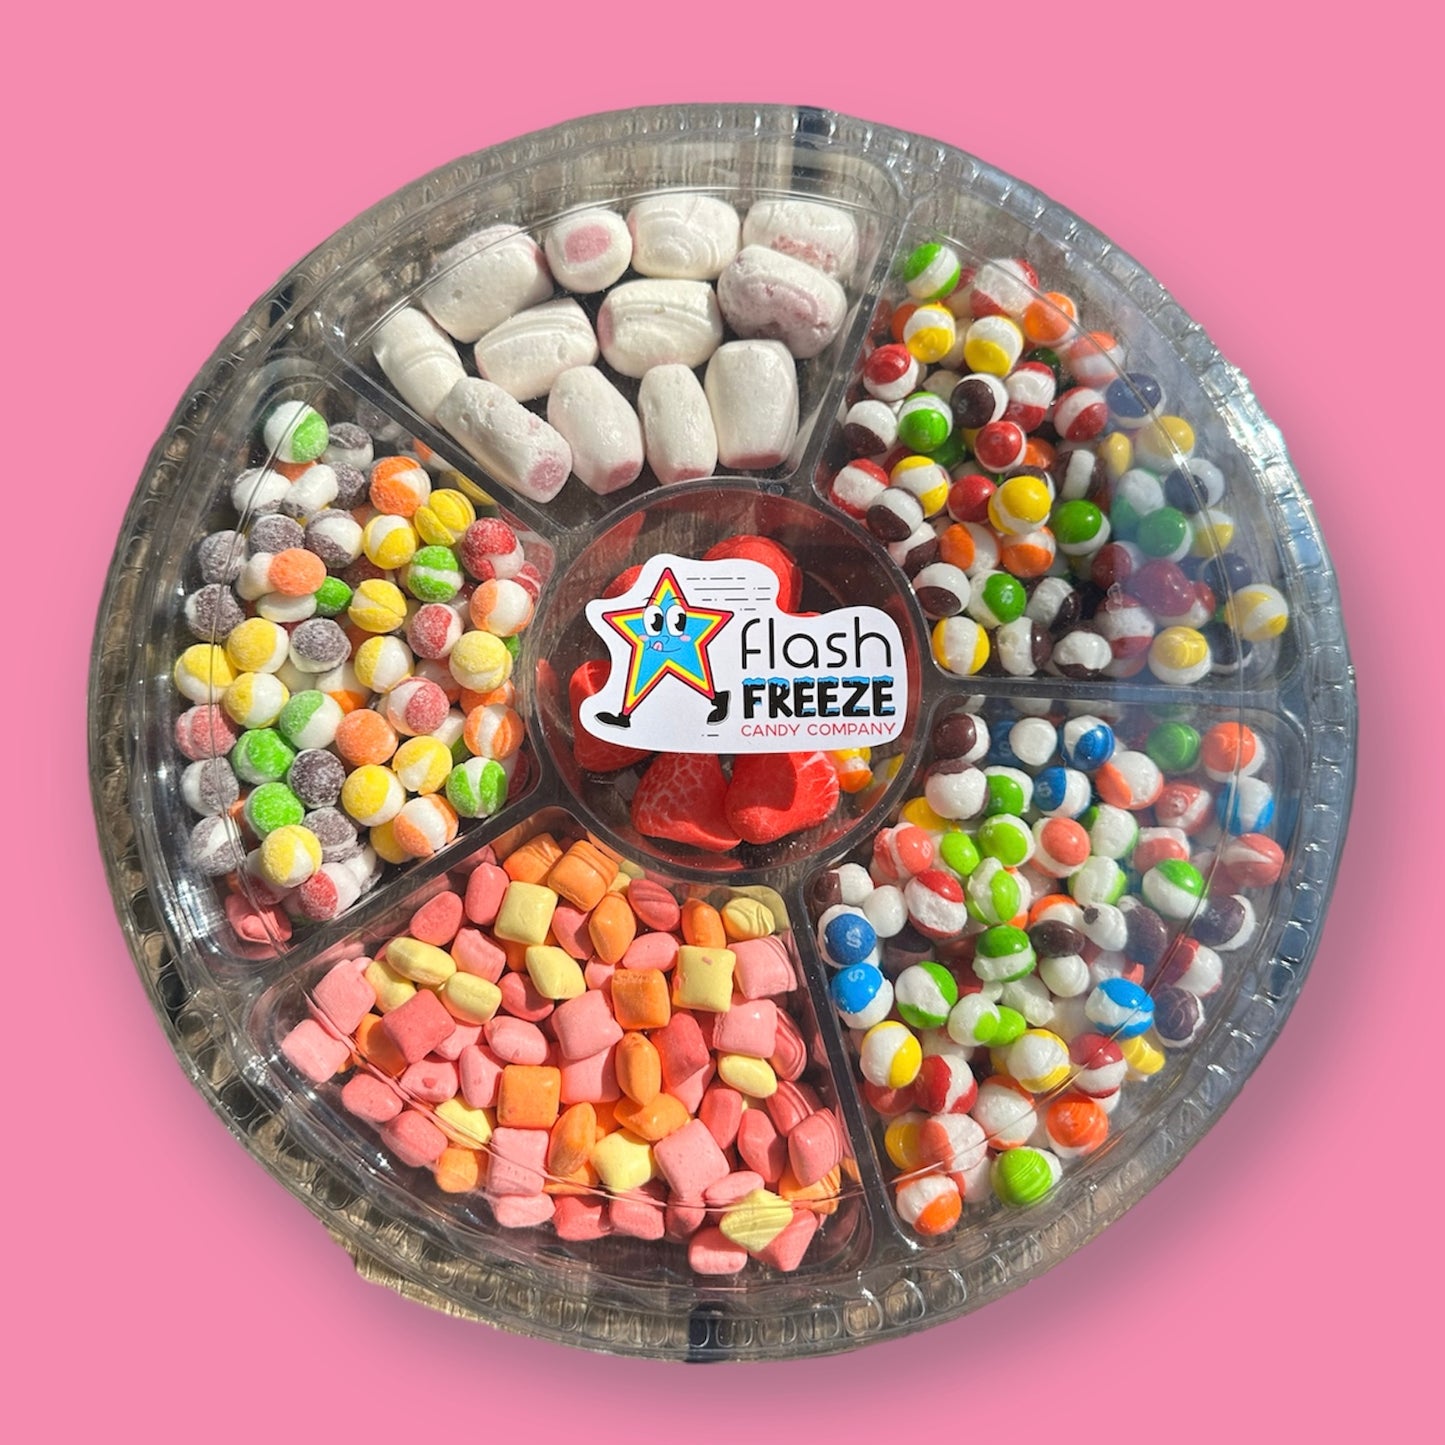 Freeze Dried Candy Tray - Save $5 by ordering before Monday Sept 25th at 8pm!